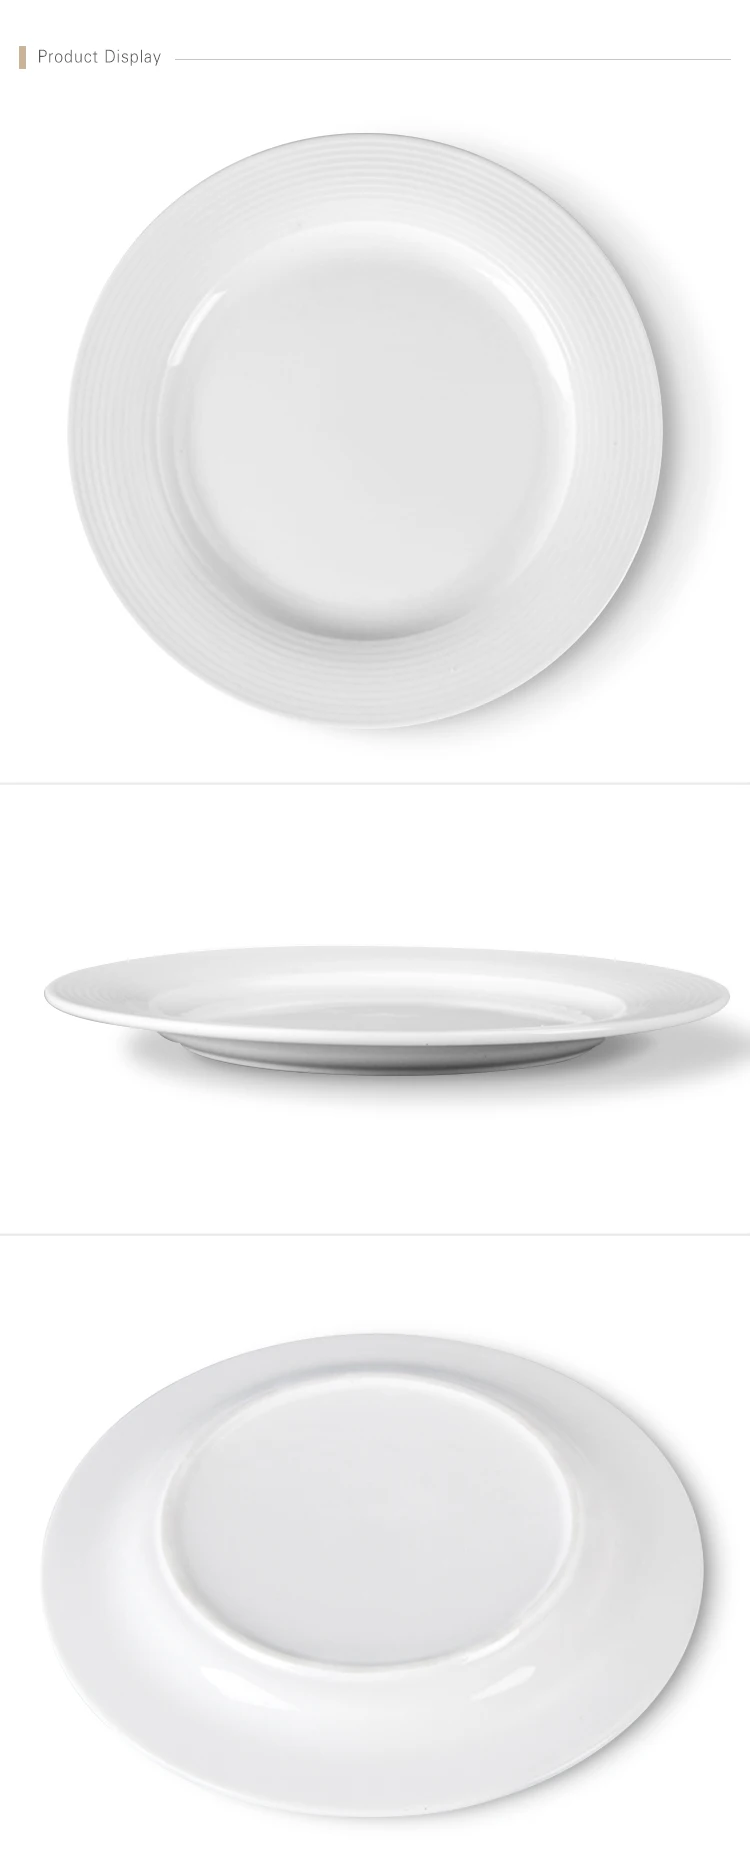 Moden Style High Quality Restaurant Tableware Plates And Dishes Set Modern, Best Selling Products Crockery Restaurant Plates^